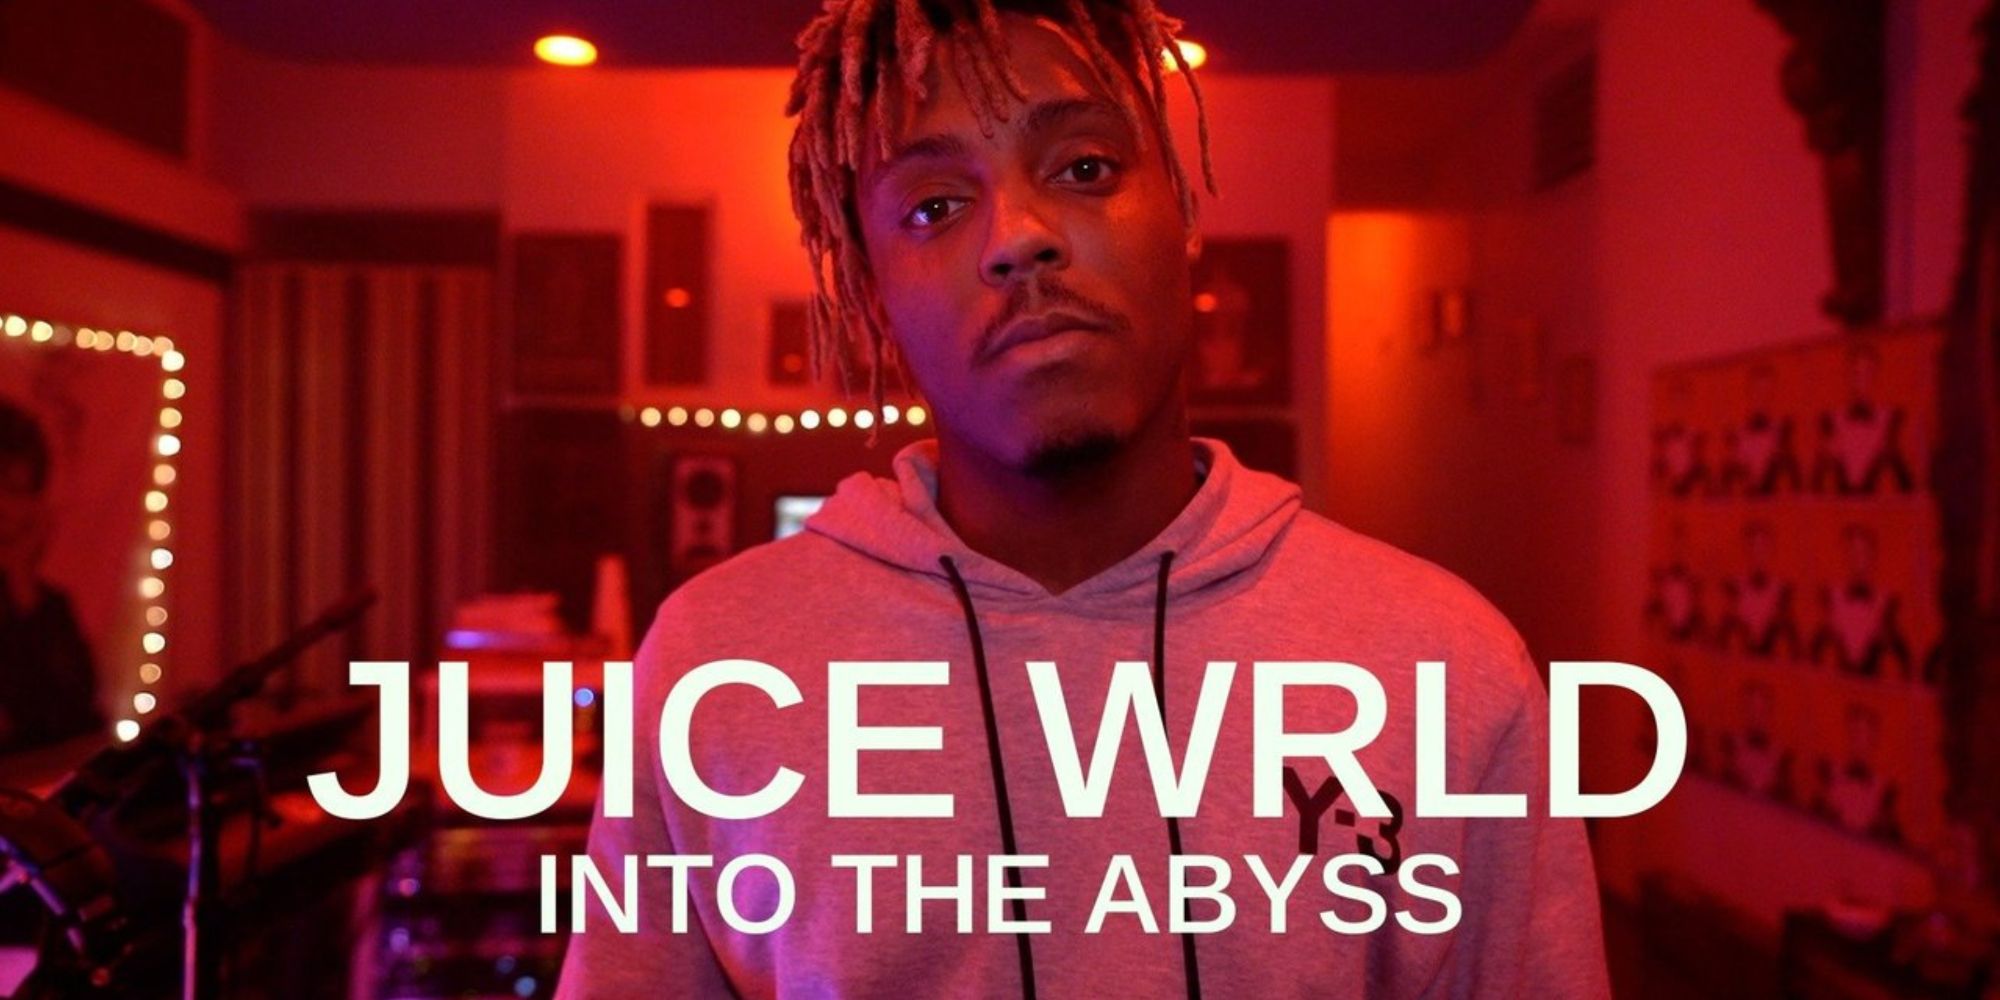 Promotional image for the documentary Juice Wrld Into The Abyss